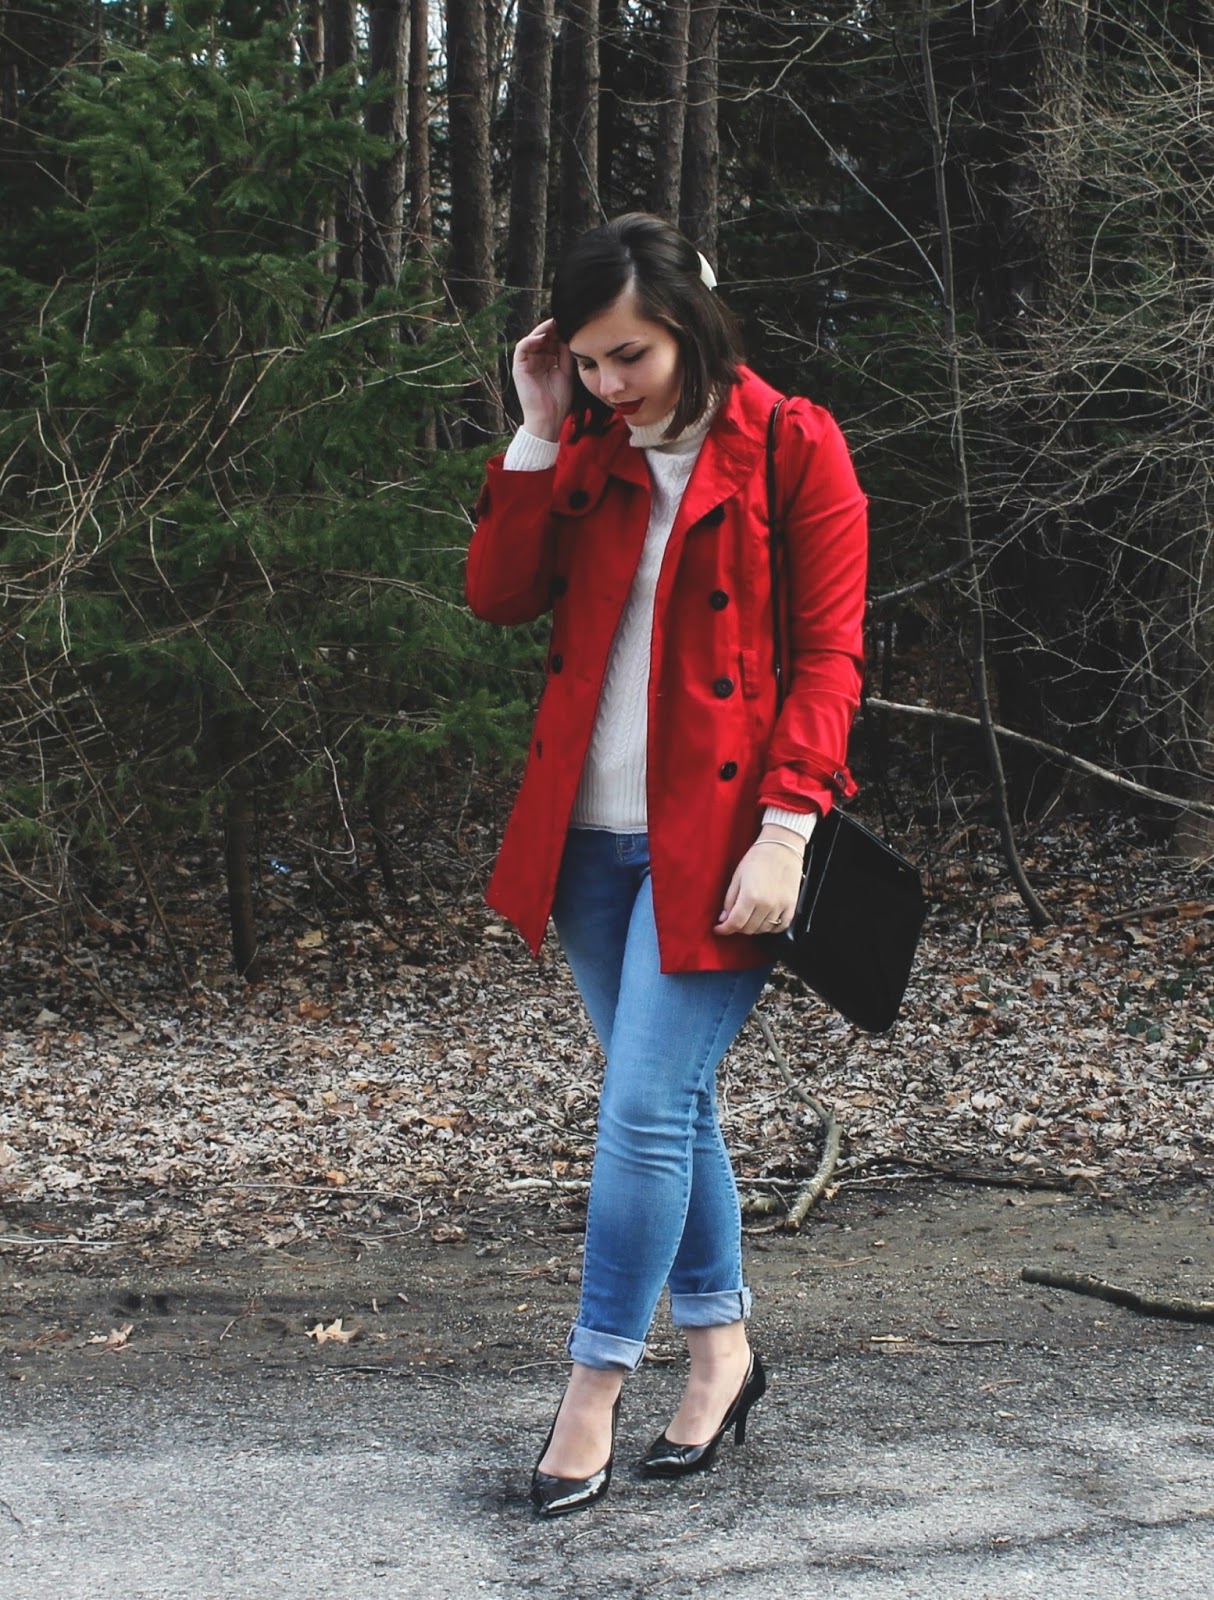 Styling a Red Trench Coat. | Passing Whimsies